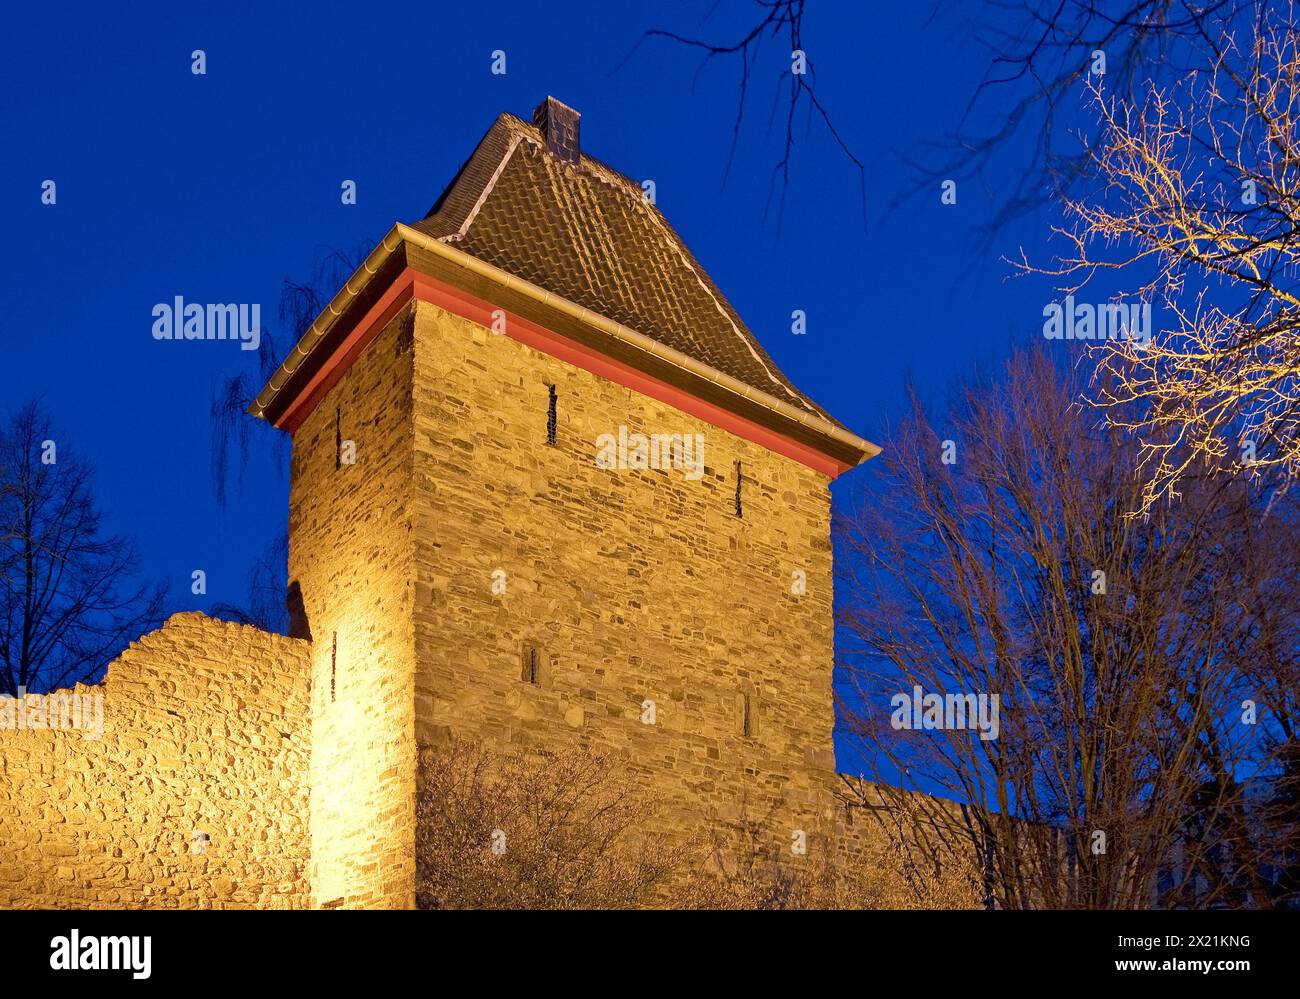 Illuminated Trinsen Tower in the evening in the old town of Ratingen, Germany, North Rhine-Westphalia, Bergisches Land, Ratingen Stock Photo